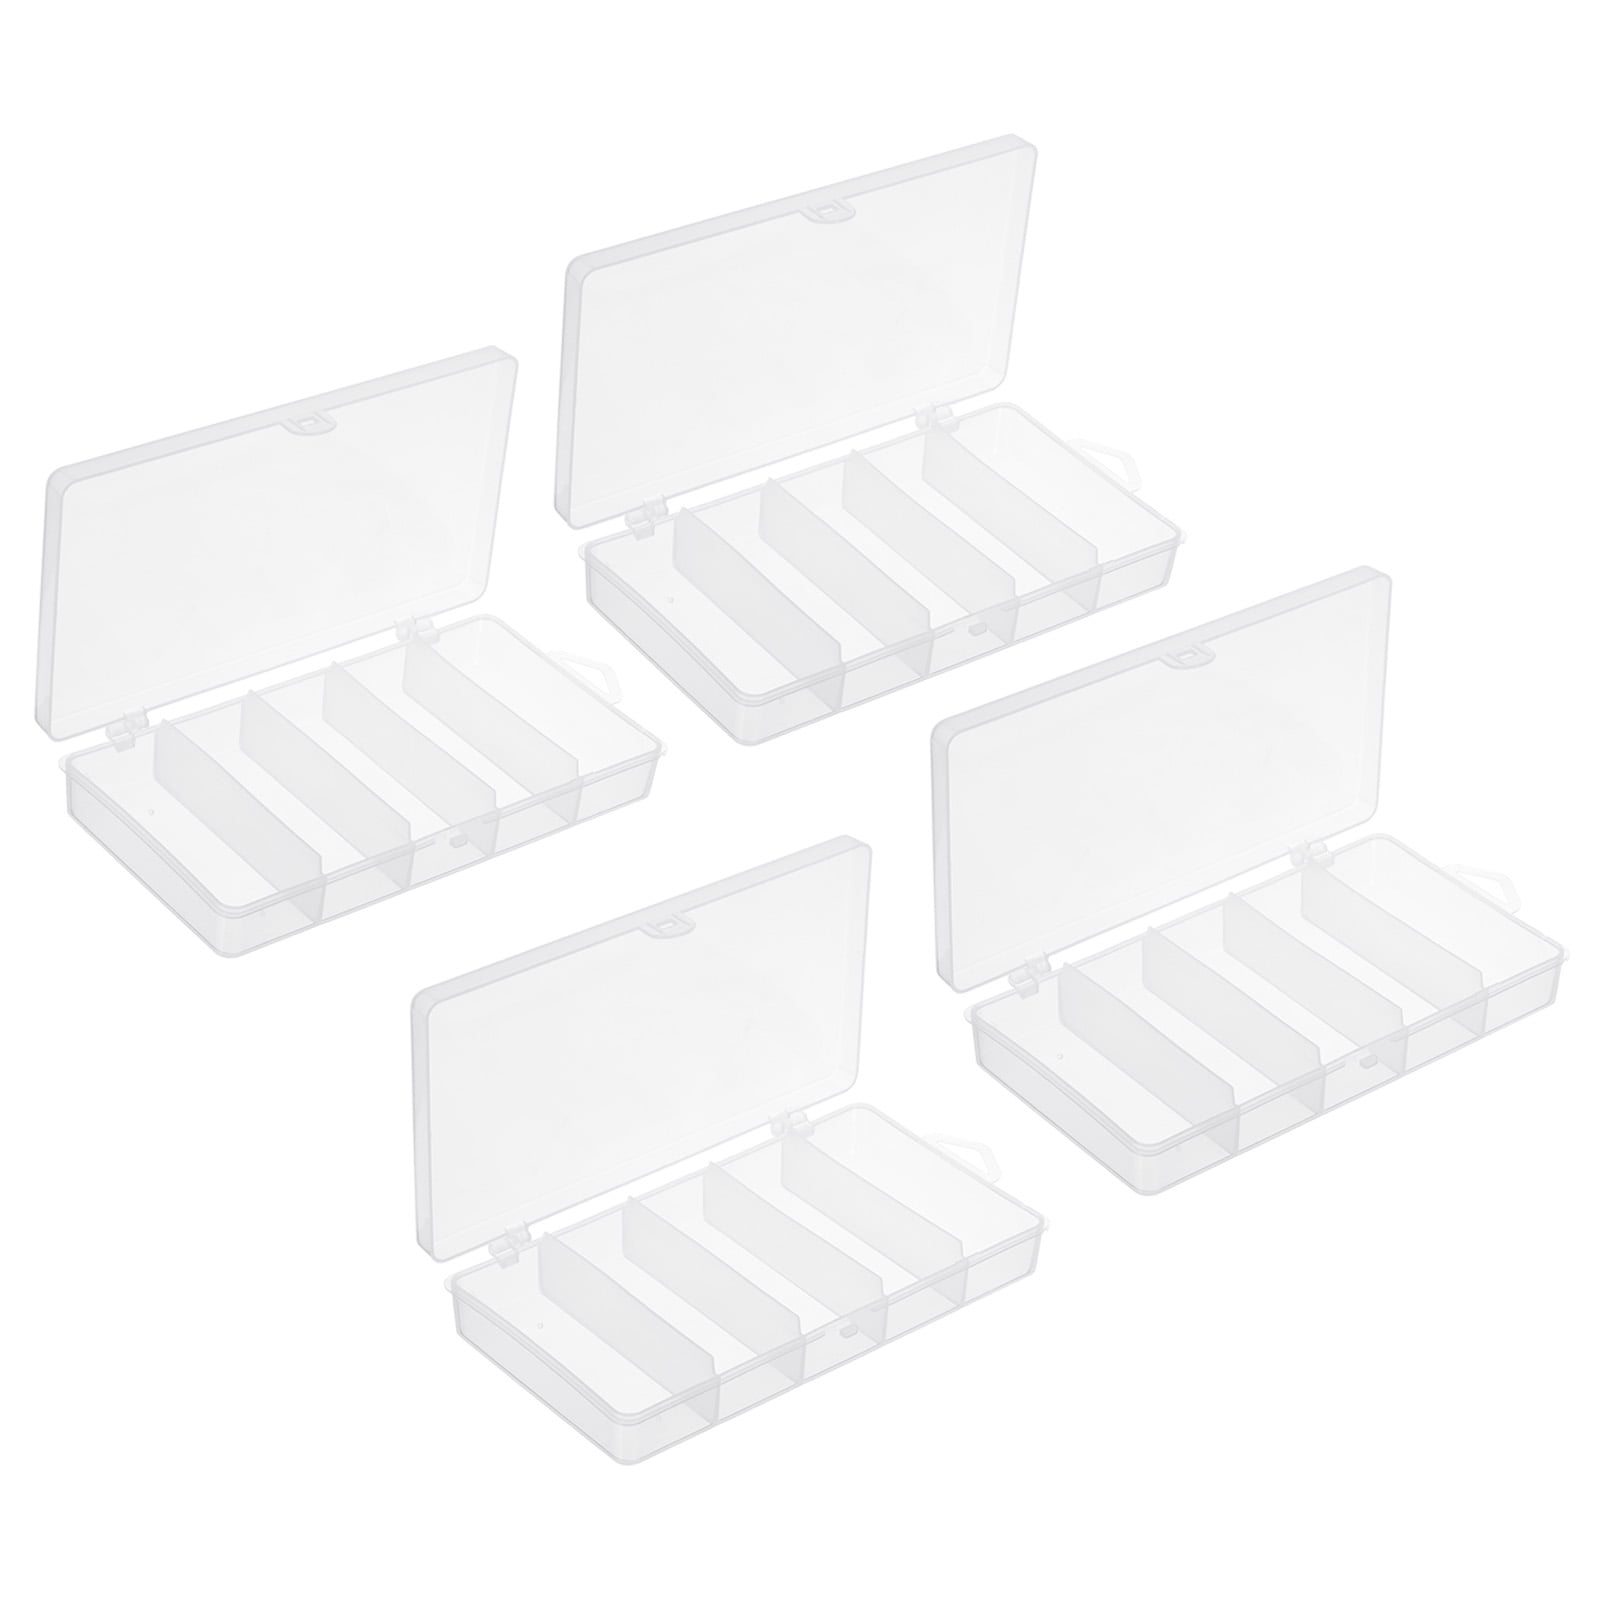 Uxcell Fishing Tackle Box, 5-grid Fish Bait Hooks Accessory Storage Case, Clear 4 Pack, Size: 4.9 x 2.4 x 1